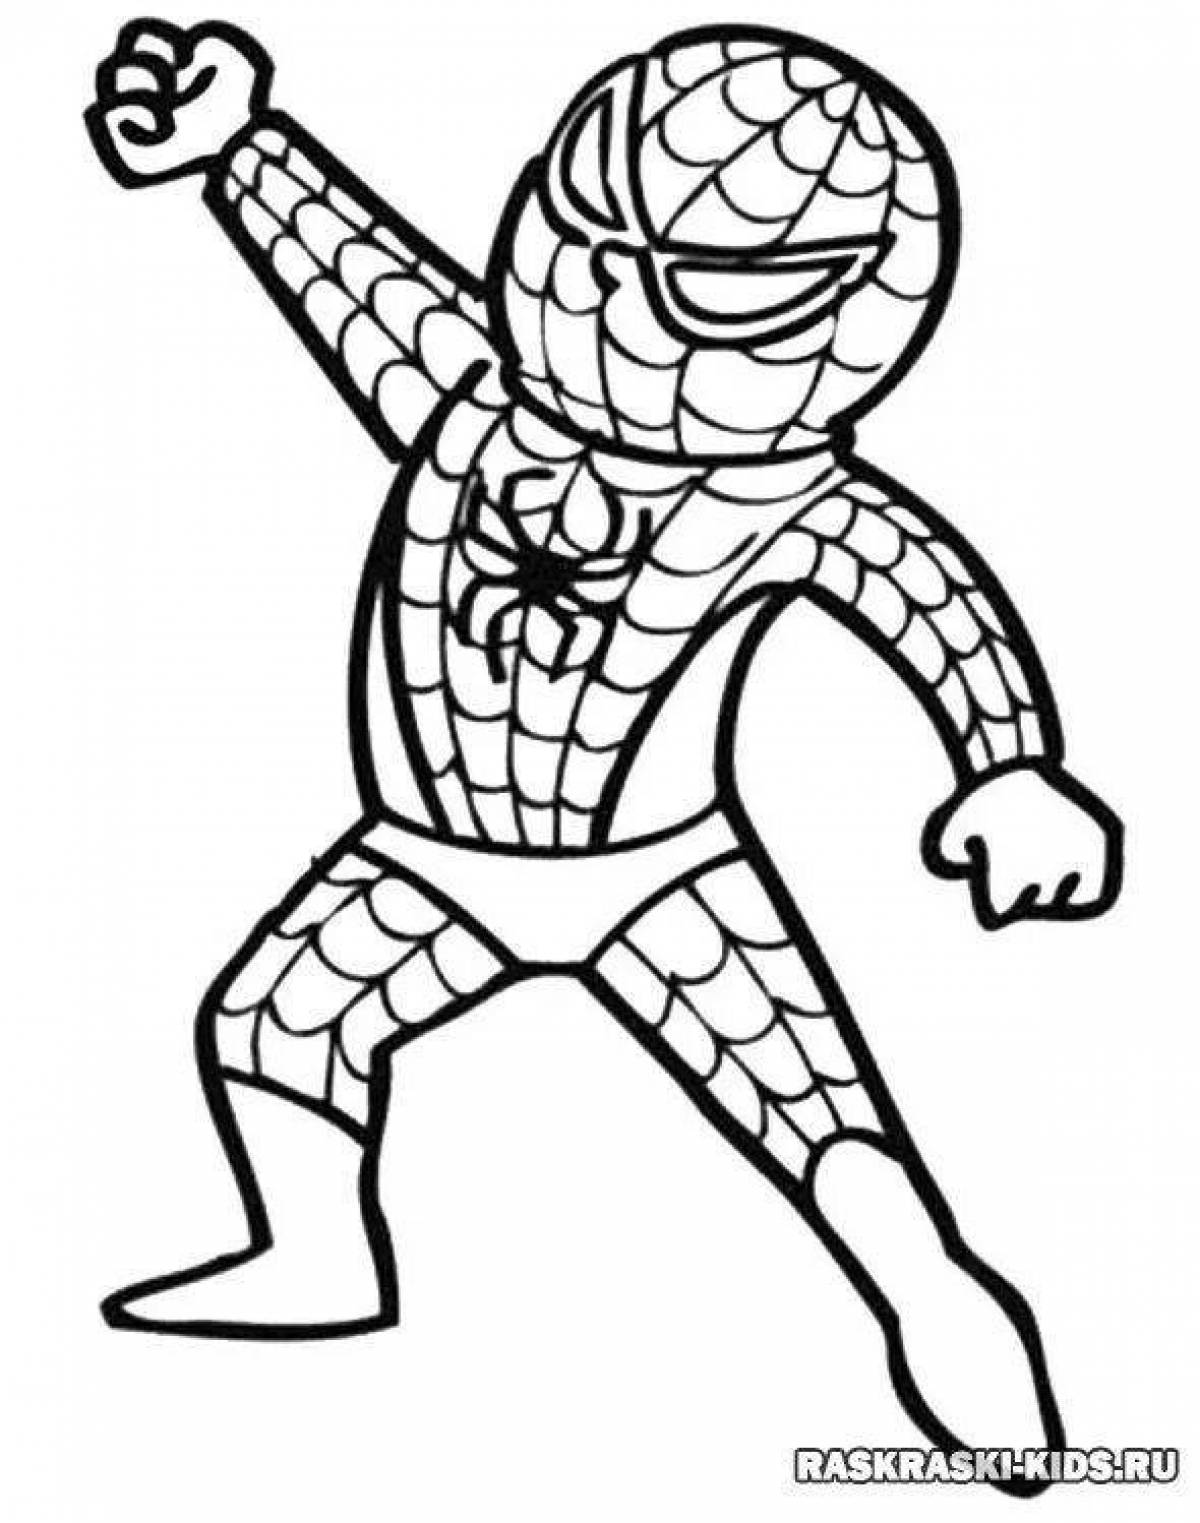 Spiderman coloring book for kids